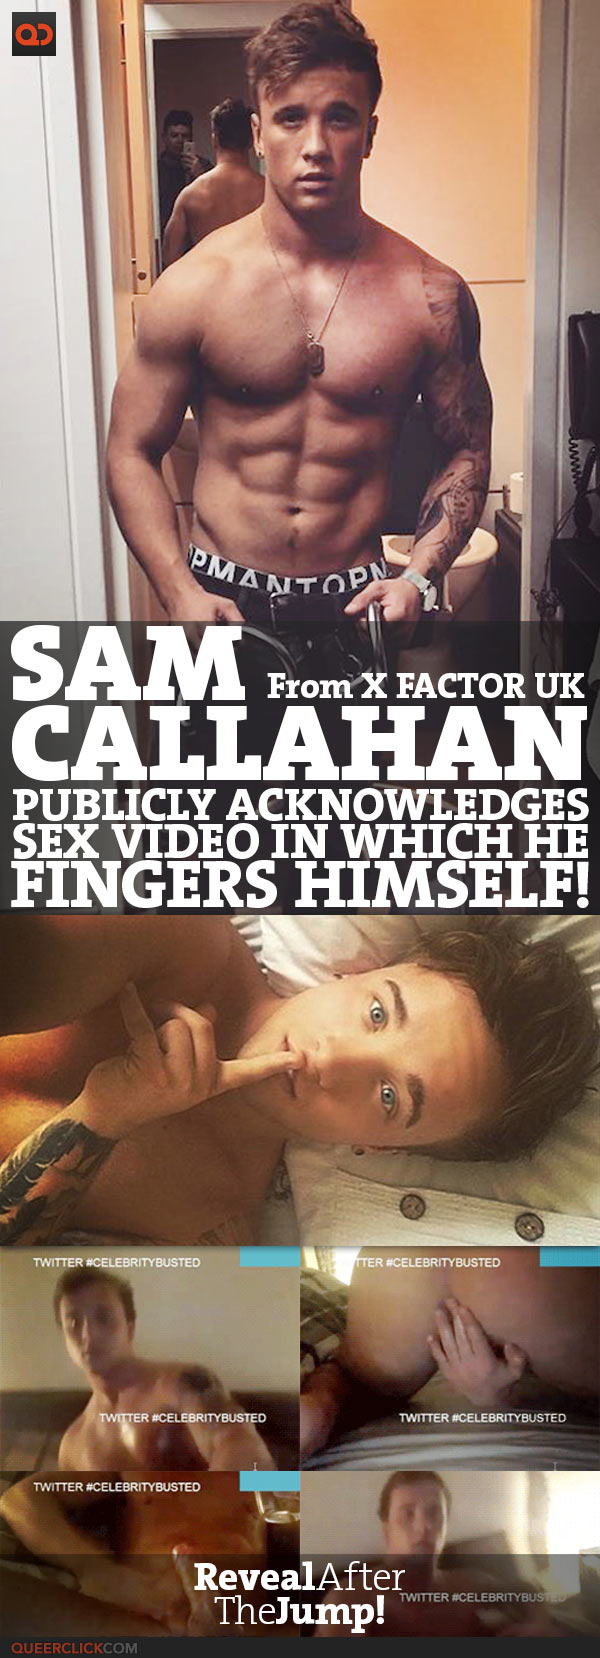 Sam Callahan, From X Factor, Publicly Acknowledges The Sex Video In Which He Fingers Himself!